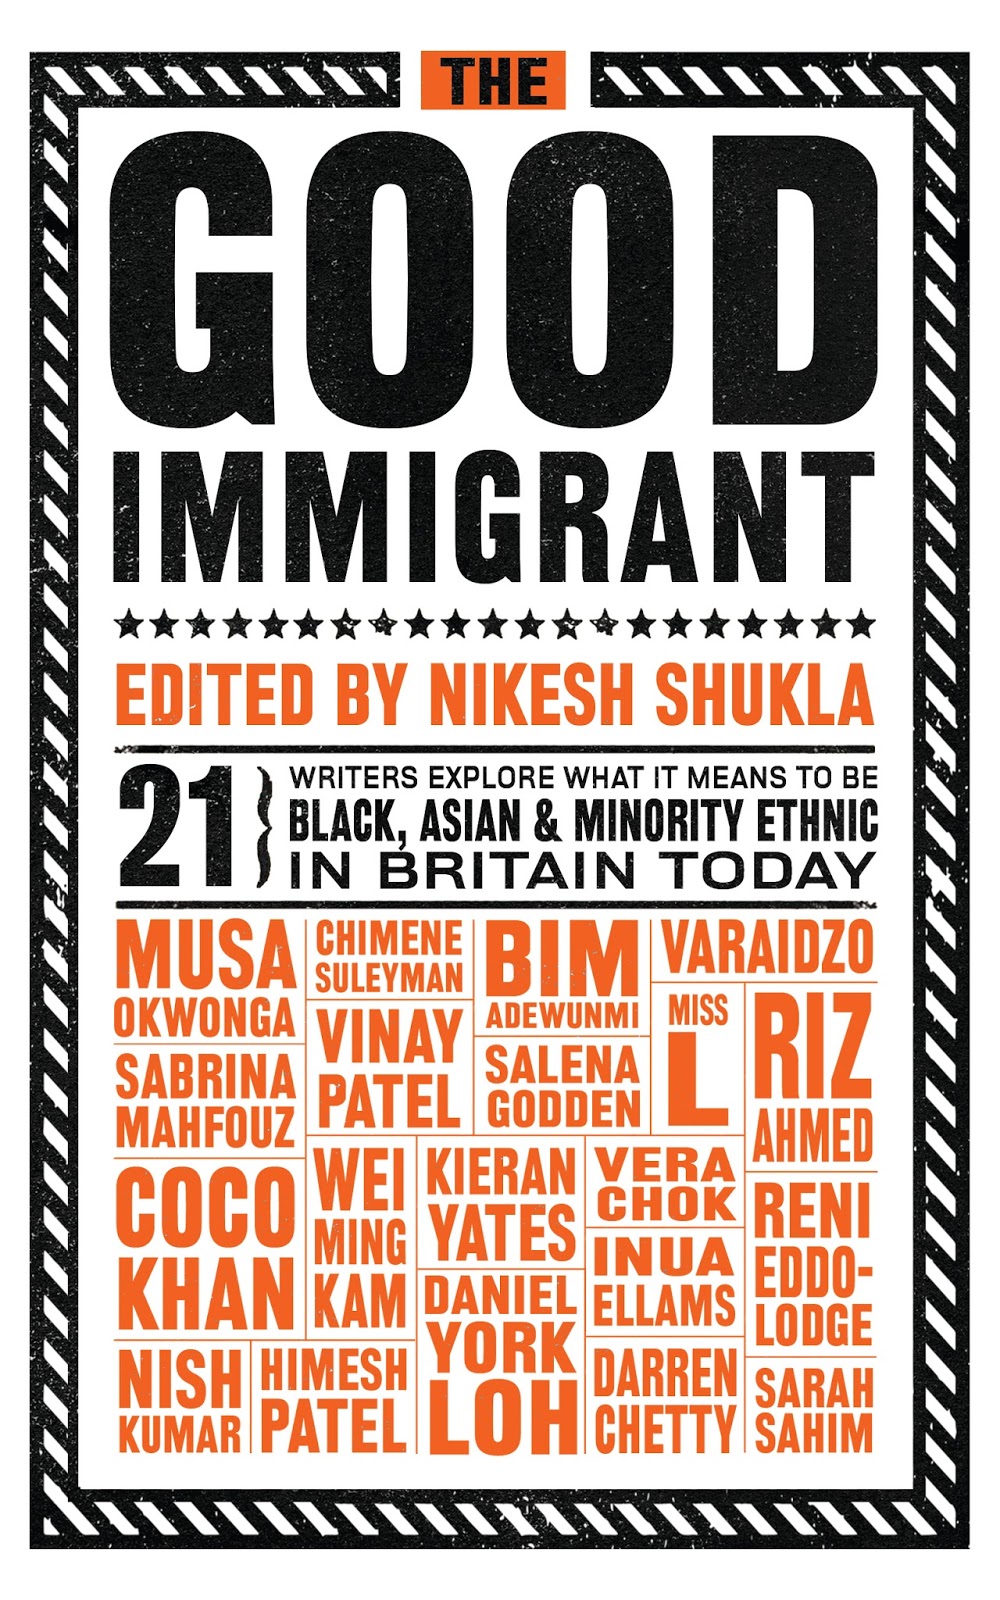 Cover of book 'The Good Immigrant'